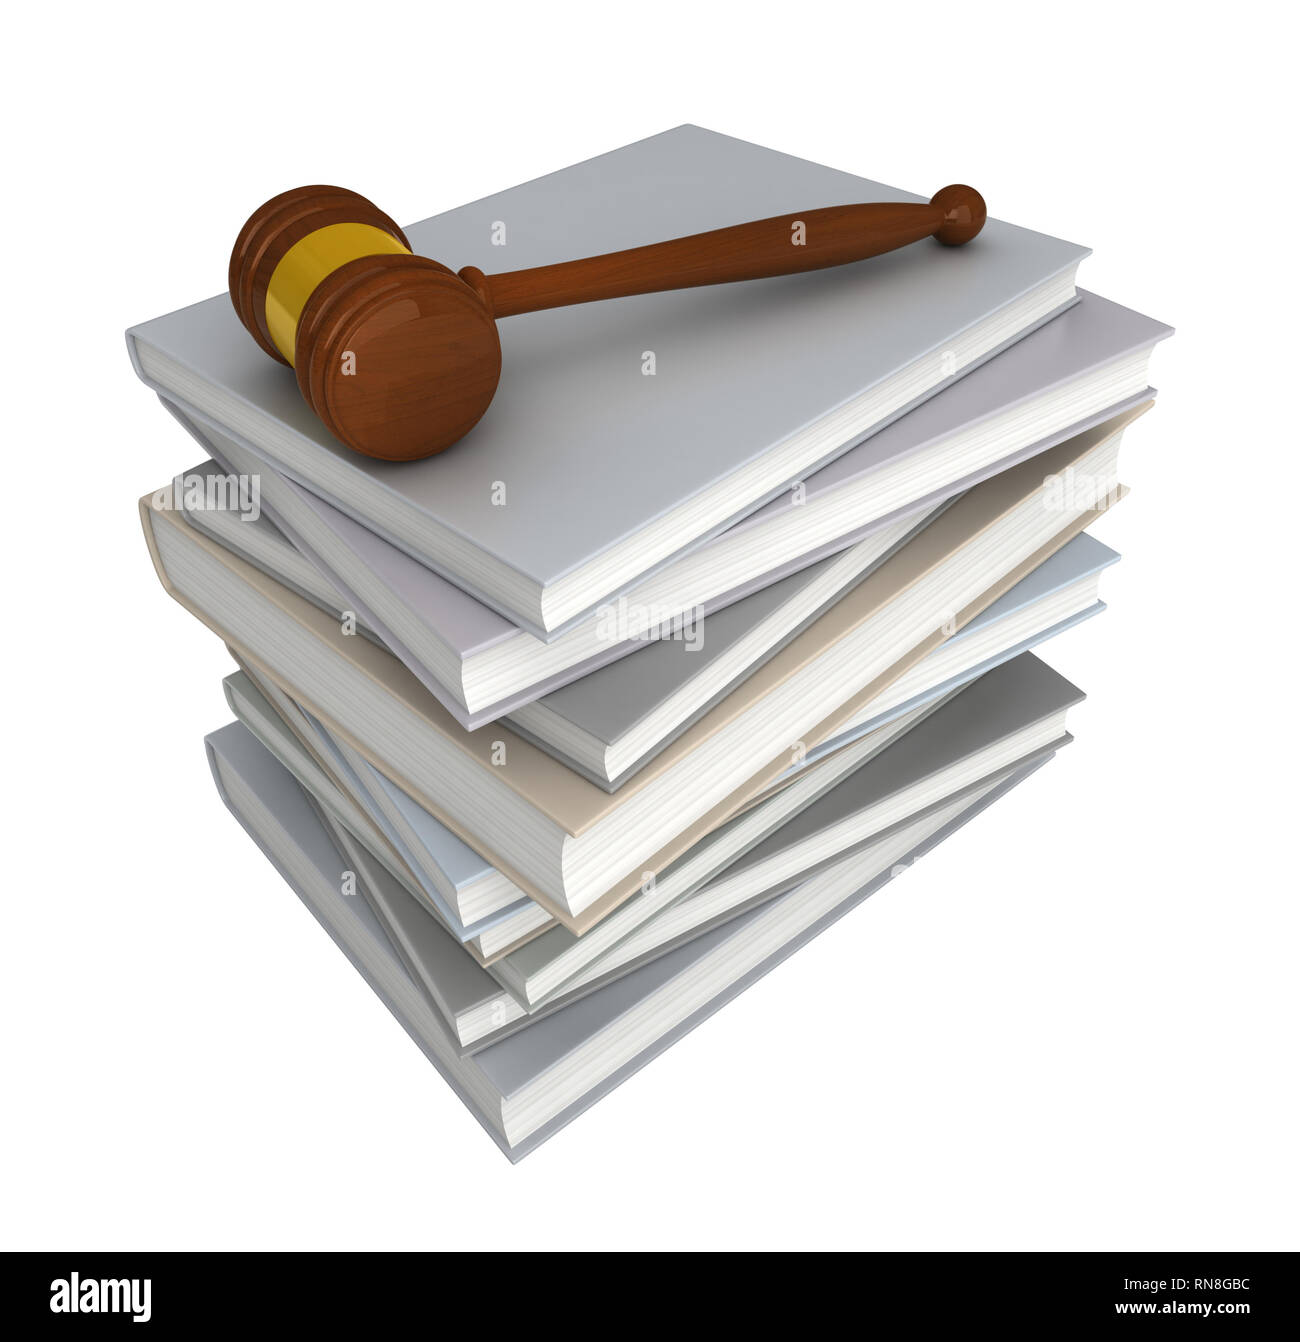 Conceptual 3d rendering judge hammer over pile of books Stock Photo